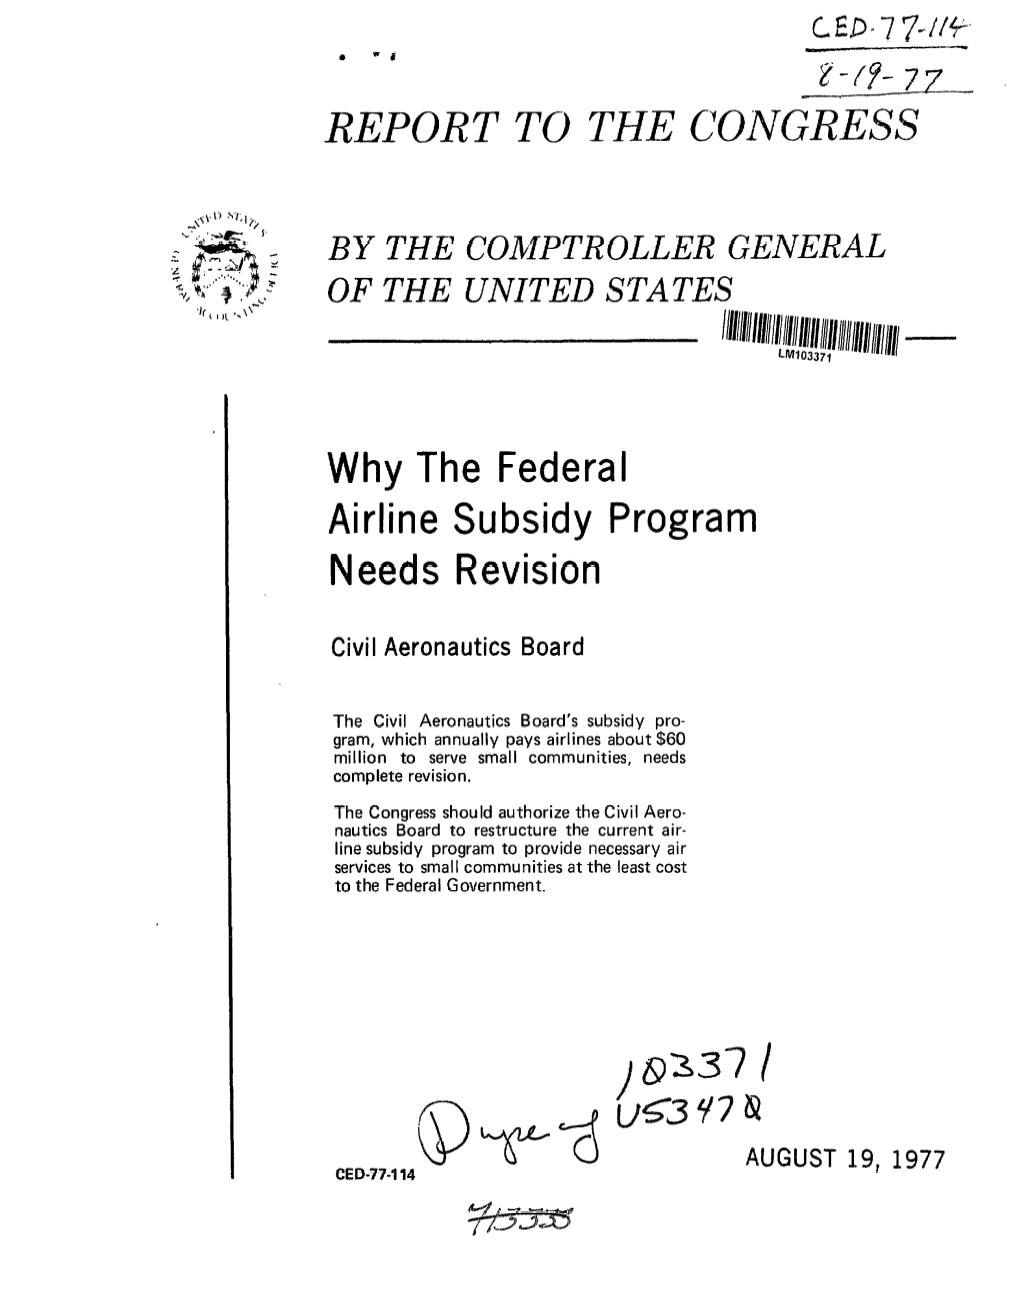 CED-77-114 Why the Federal Airline Subsidy Program Needs Revision